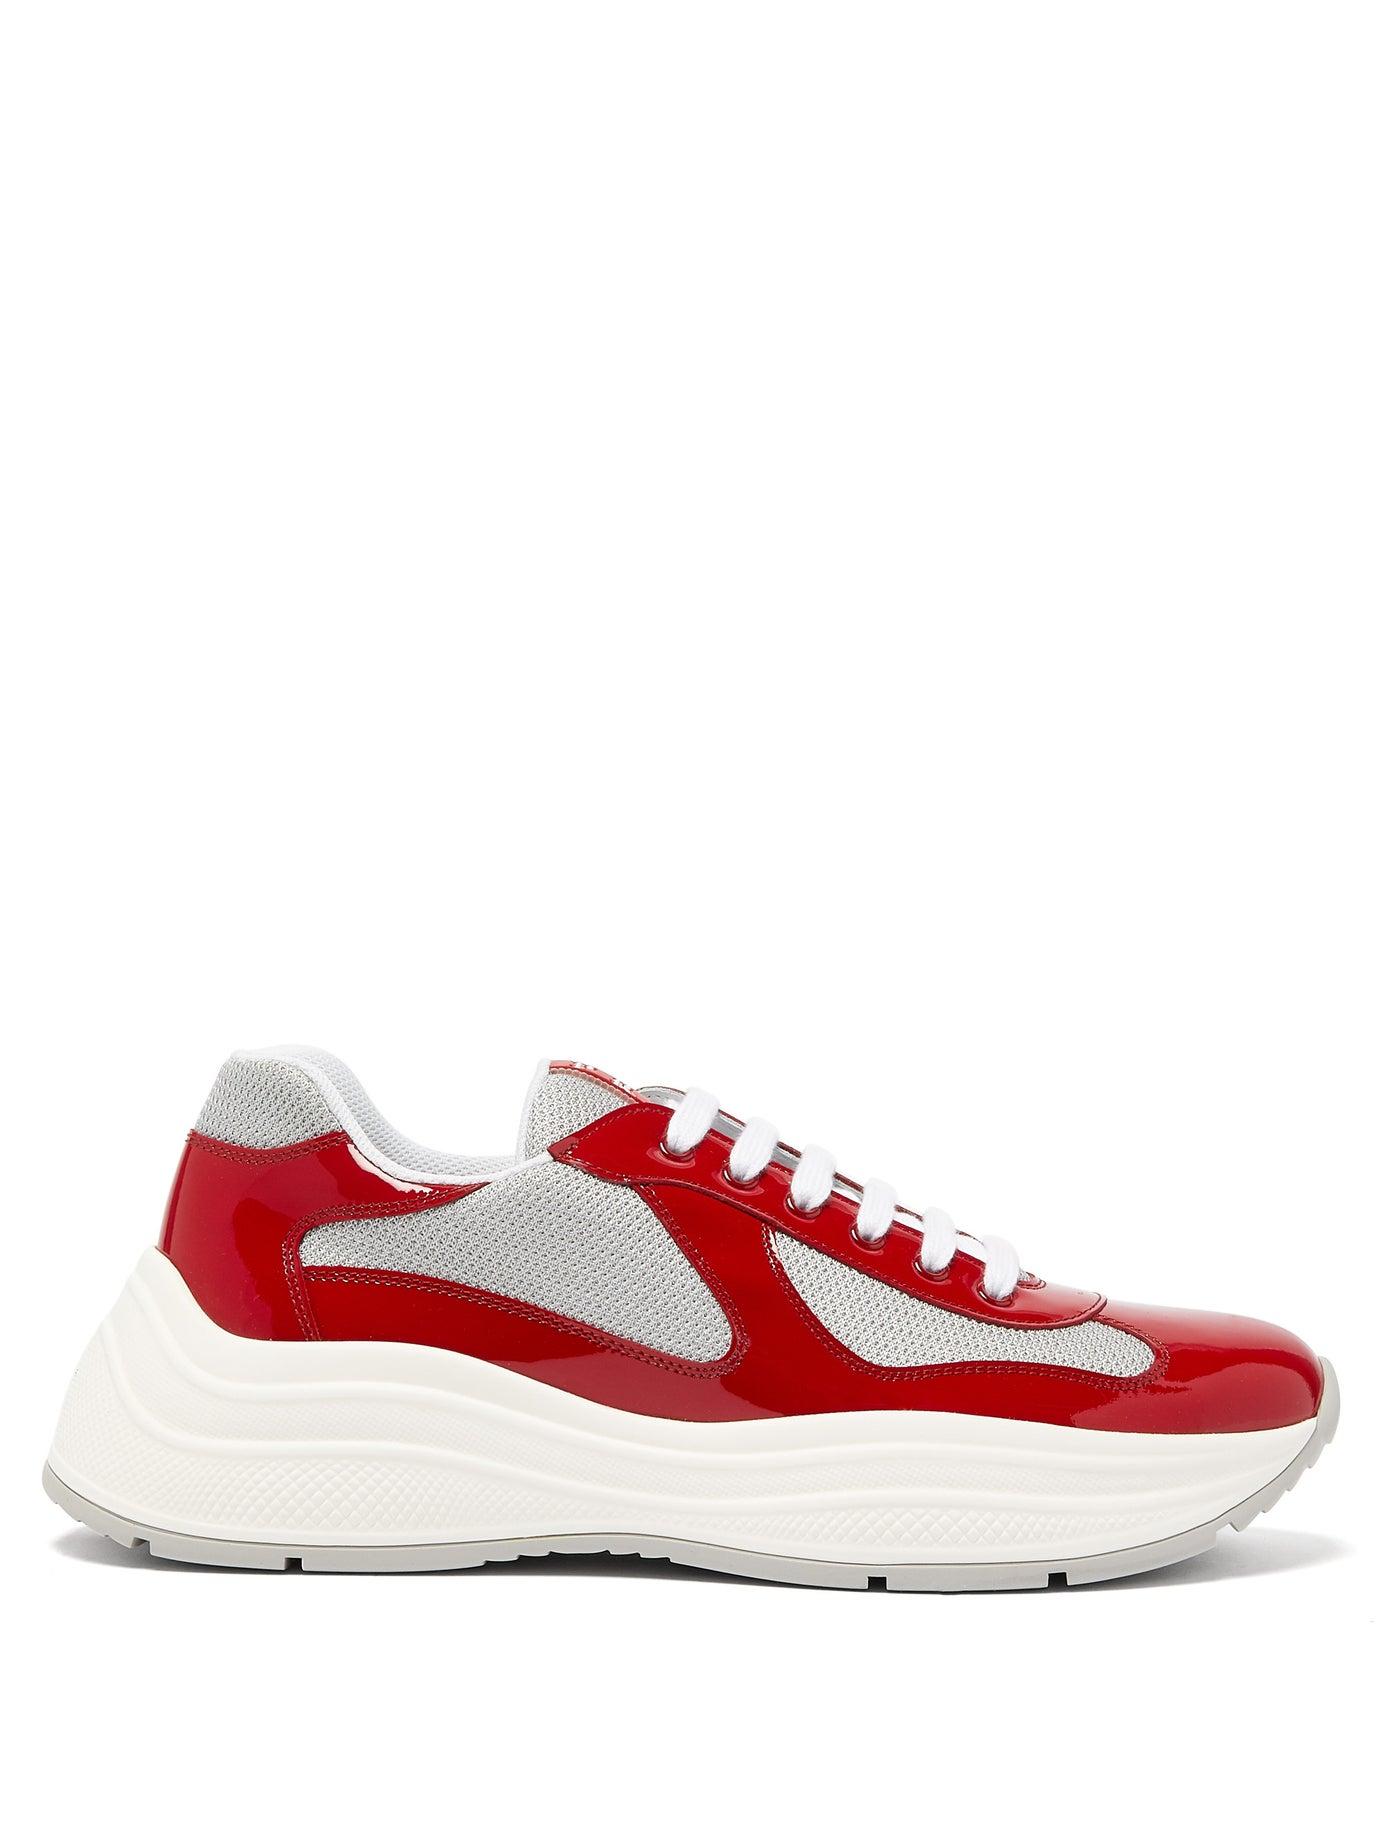 Prada Men's Shoes Leather Trainers Sneakers in Red for Men - Save 67% - Lyst